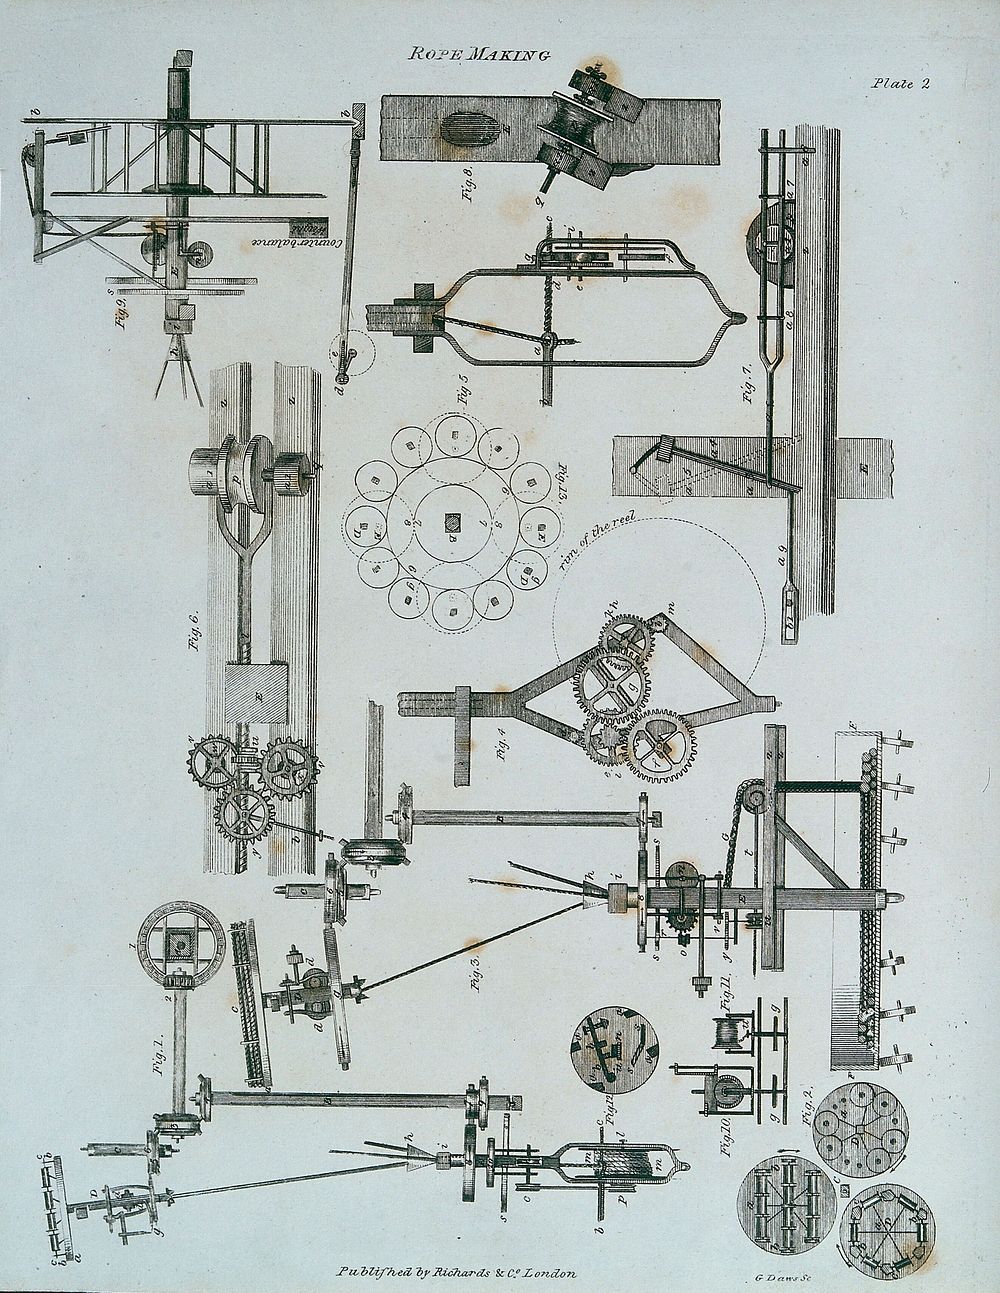 Rope-making: details of various parts of a rope-making machine. Engraving by G. Daws.